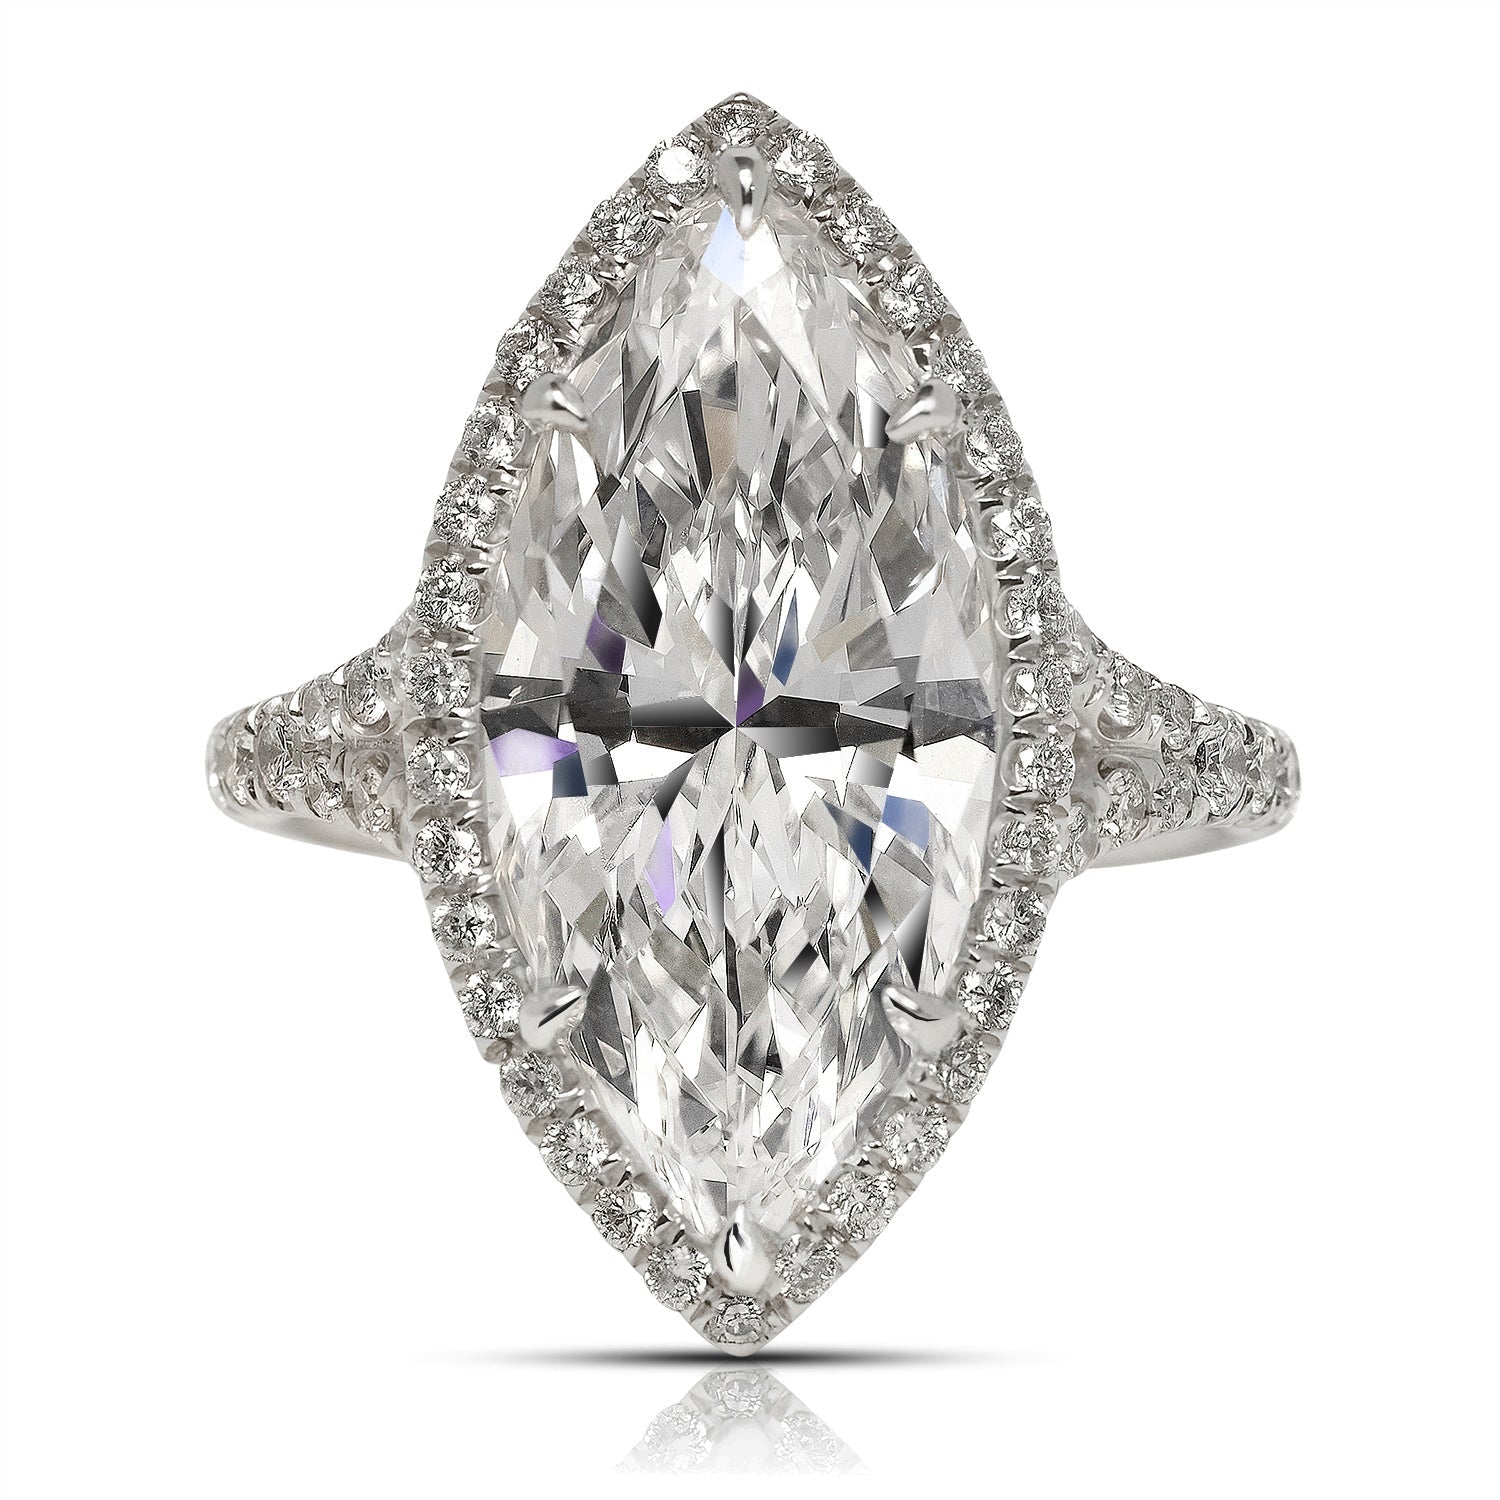 Diamond Ring Marquise Cut 6 Carat Sidestone Ring in Platinum Front View